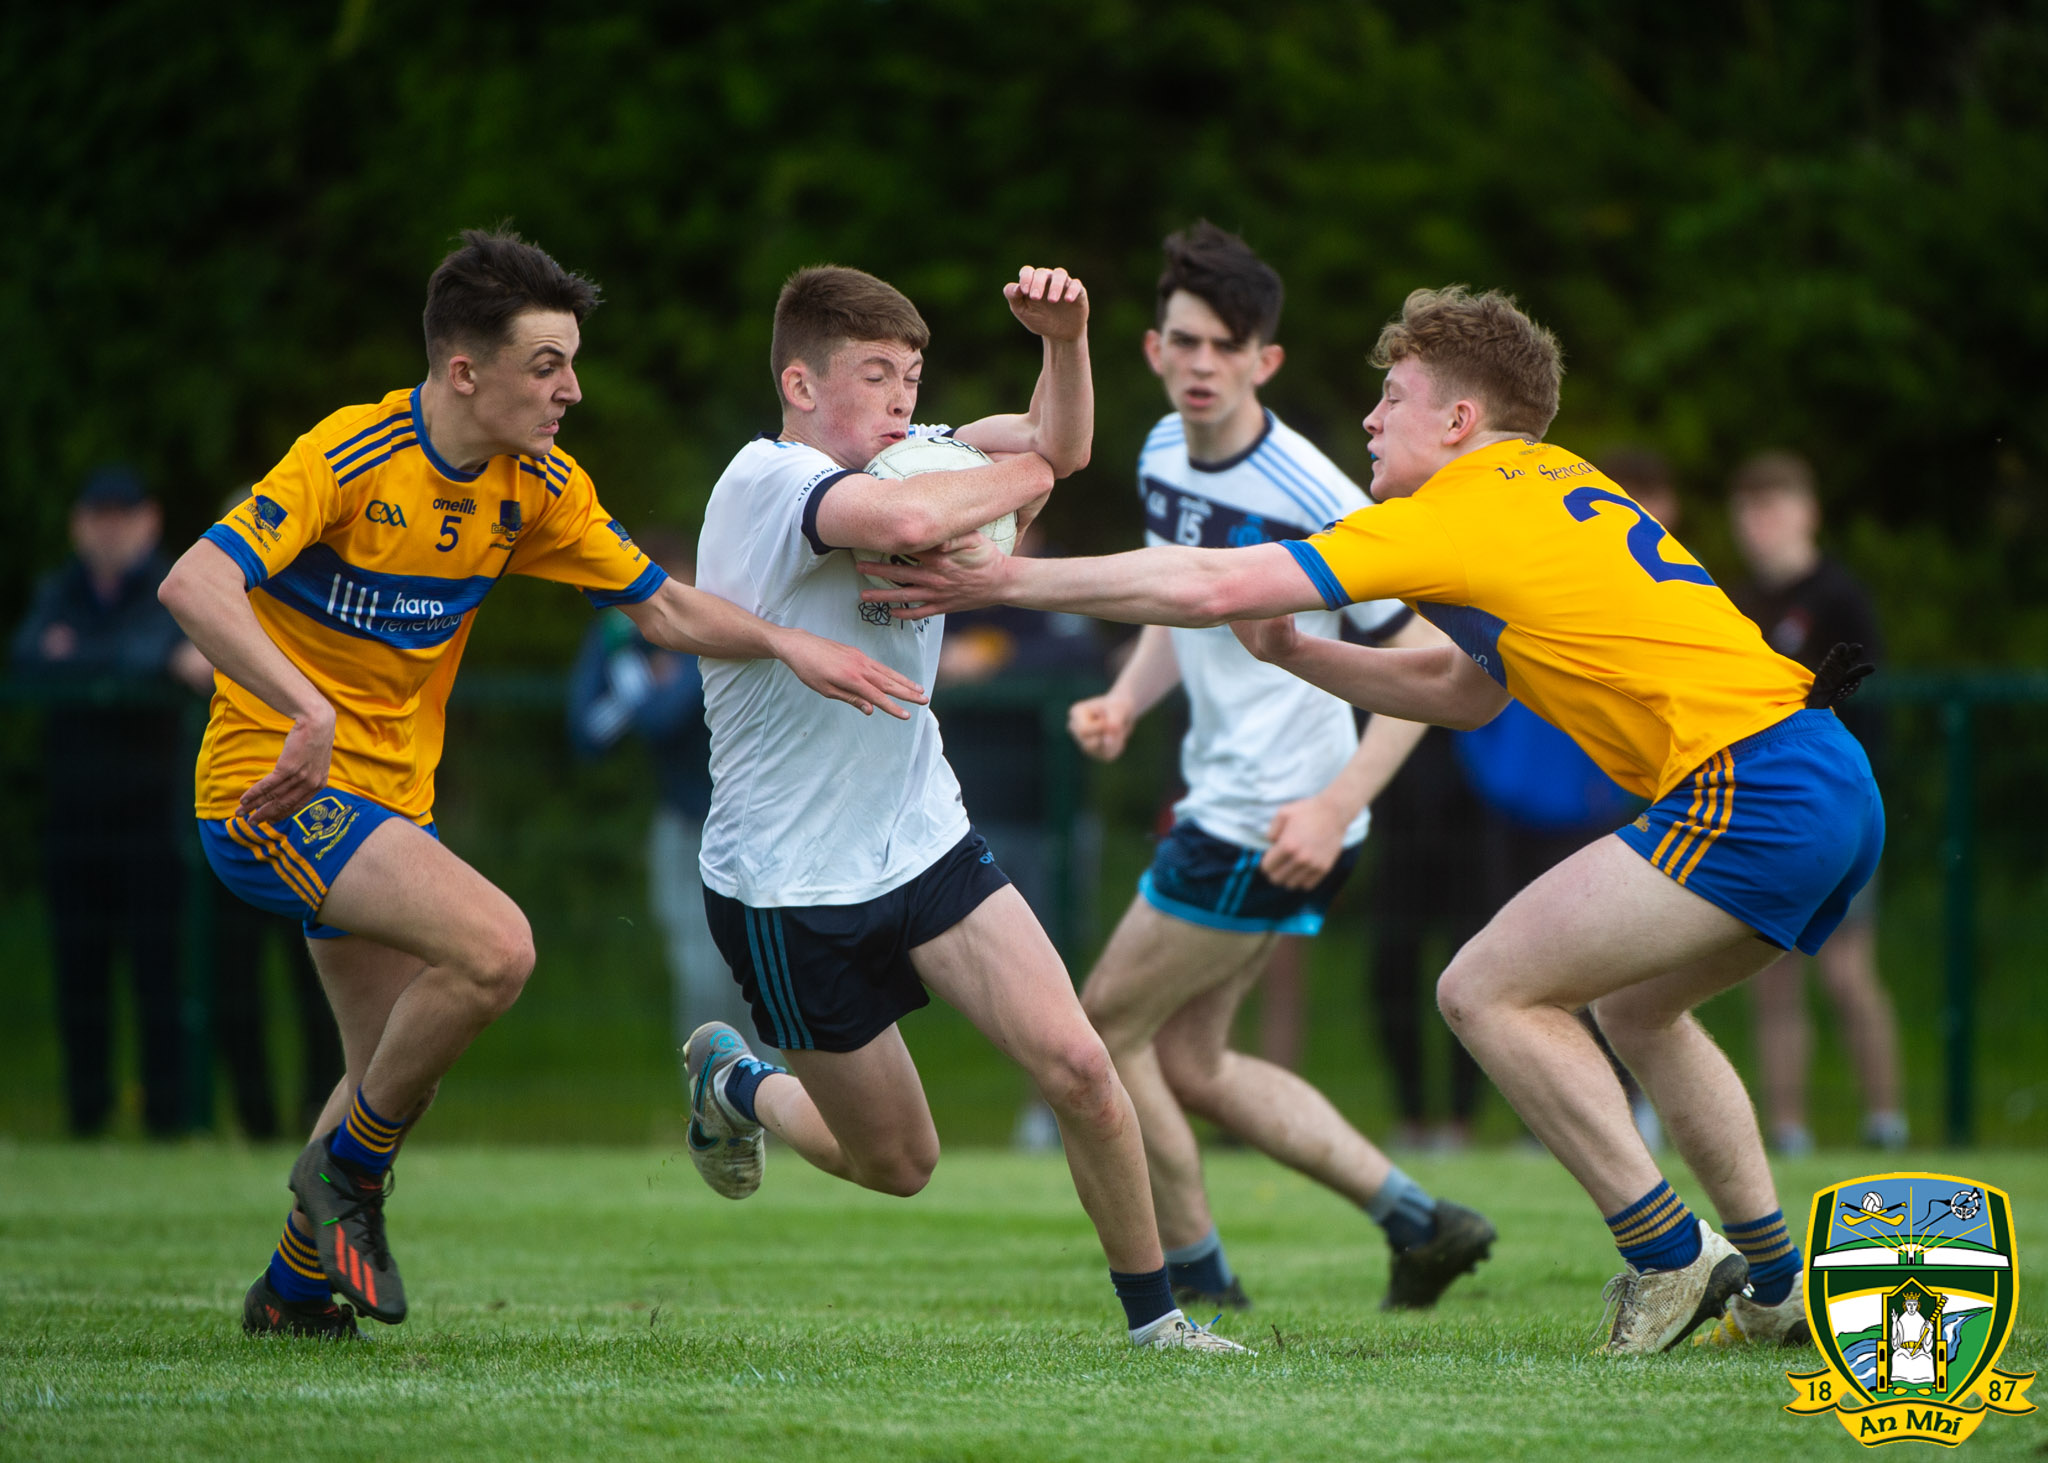 Seven winners crowned in LMFM Minor Football Tournament Finals